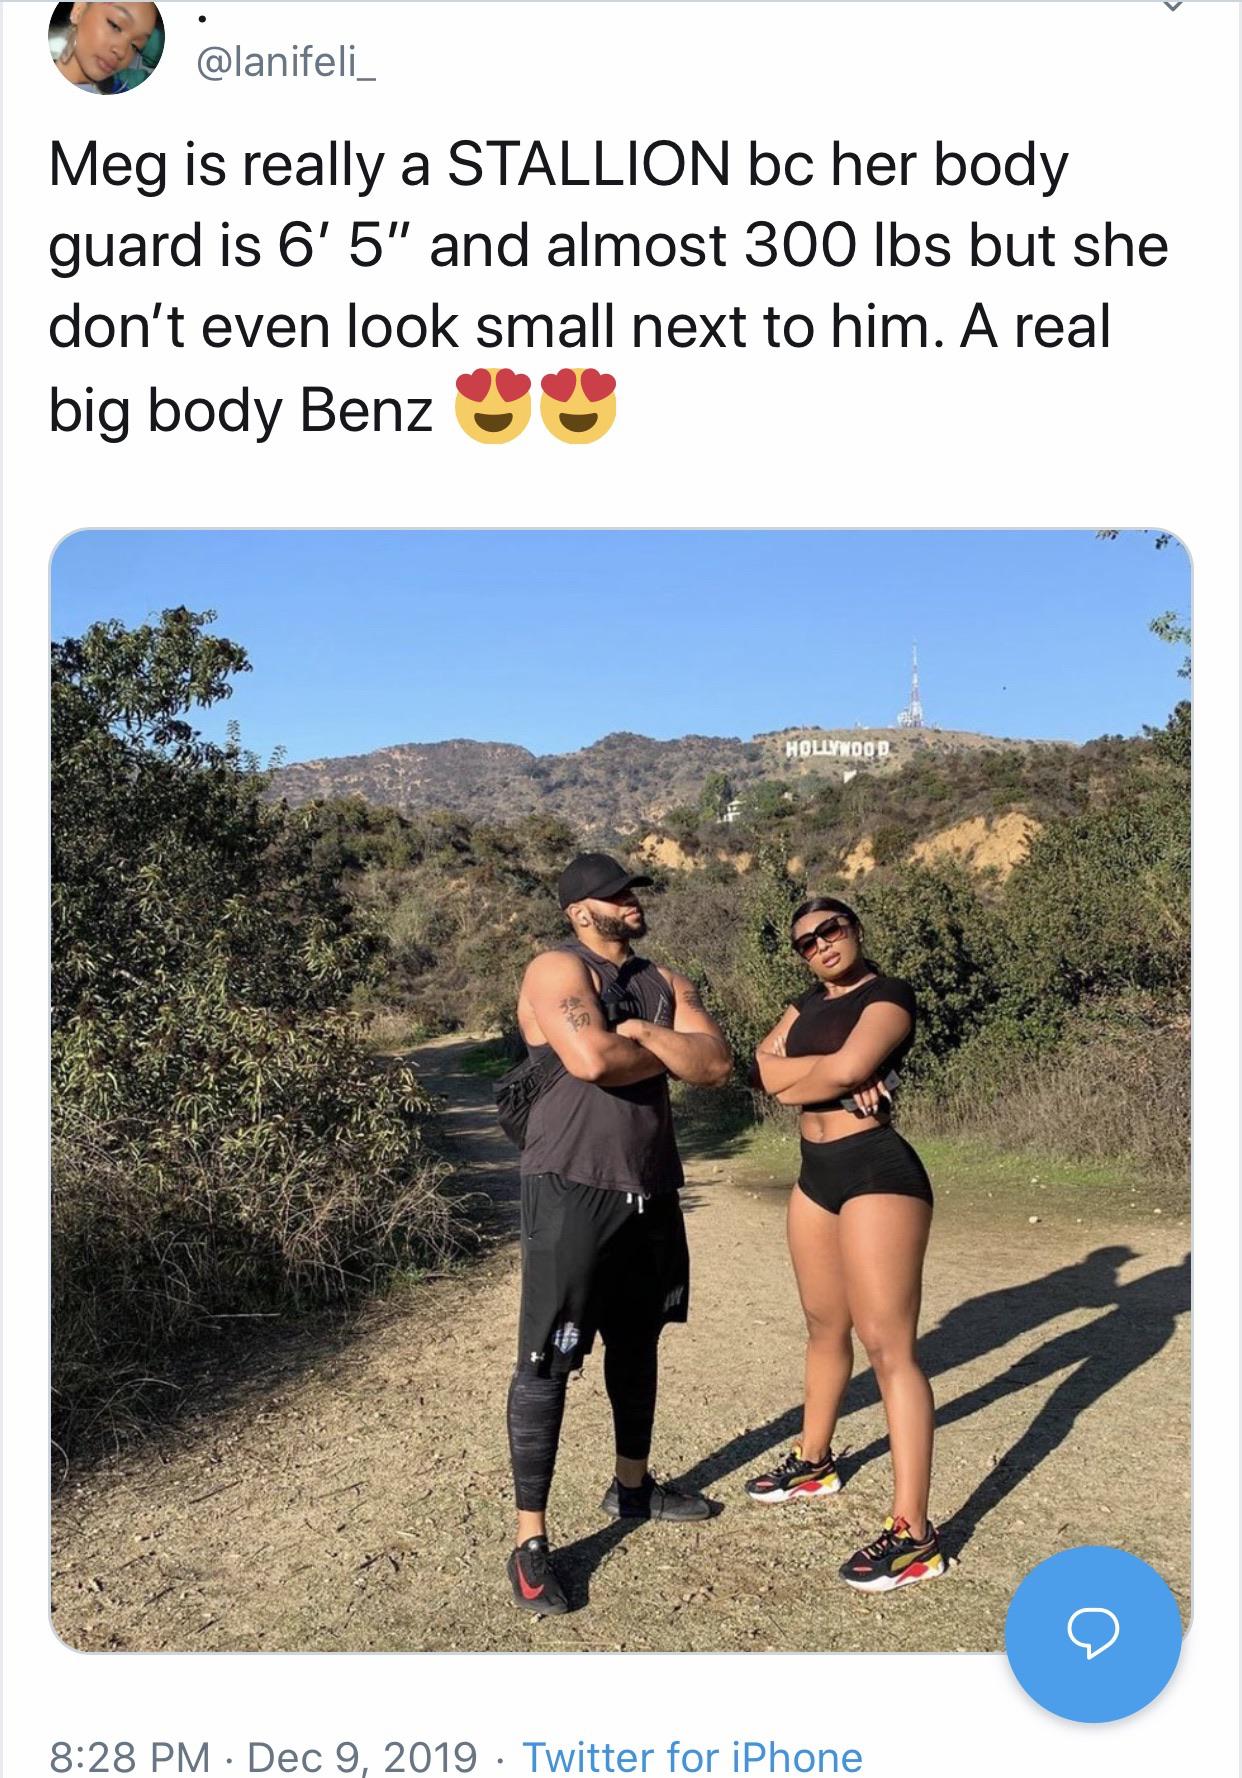 vacation - Meg is really a Stallion bc her body guard is 6' 5" and almost 300 lbs but she don't even look small next to him. A real big body Benz Hollywood Twitter for iPhone